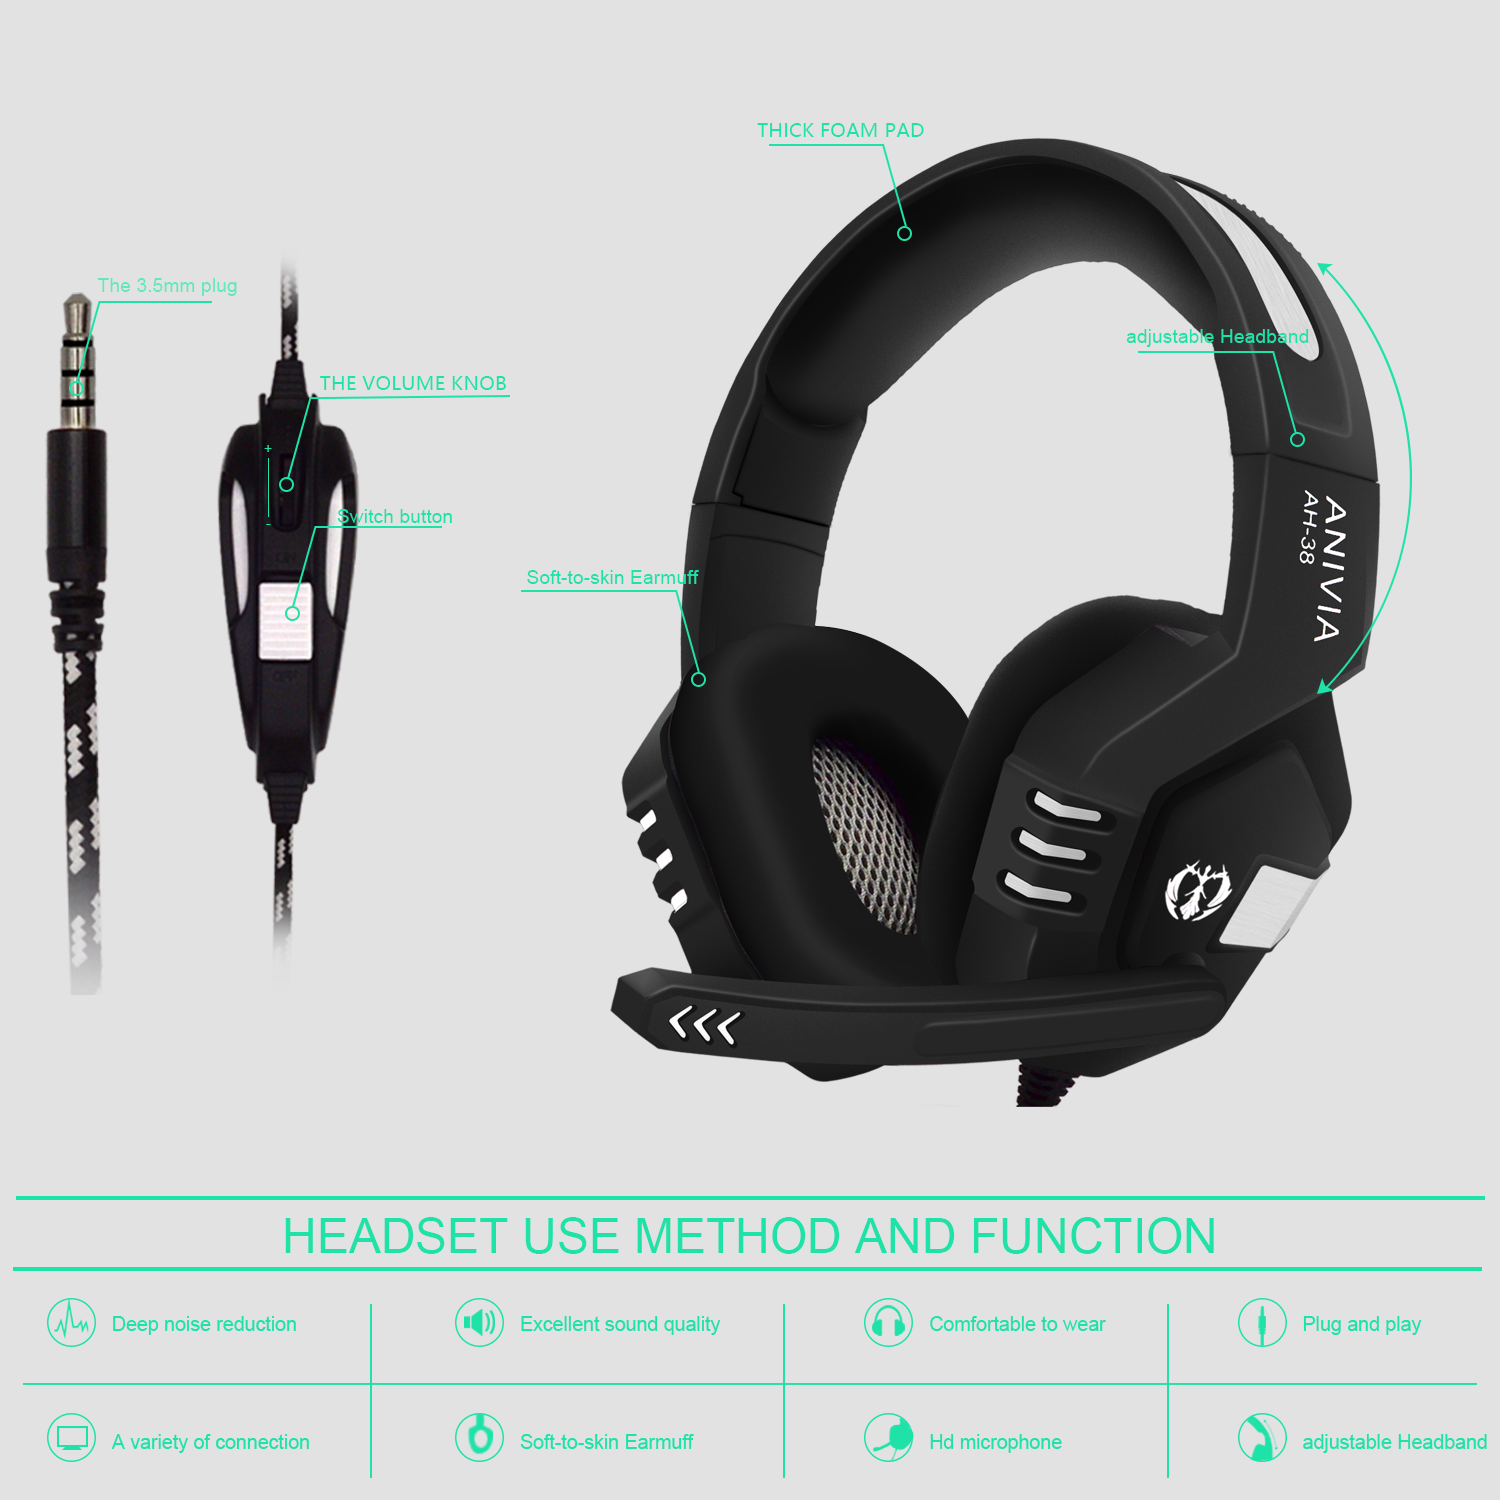 Anivia-AH38-Gming-Headset-35mm-Audio-Interface-Omnidirectional-Noise-Isolating-Flexible-Microphone-f-1916908-5